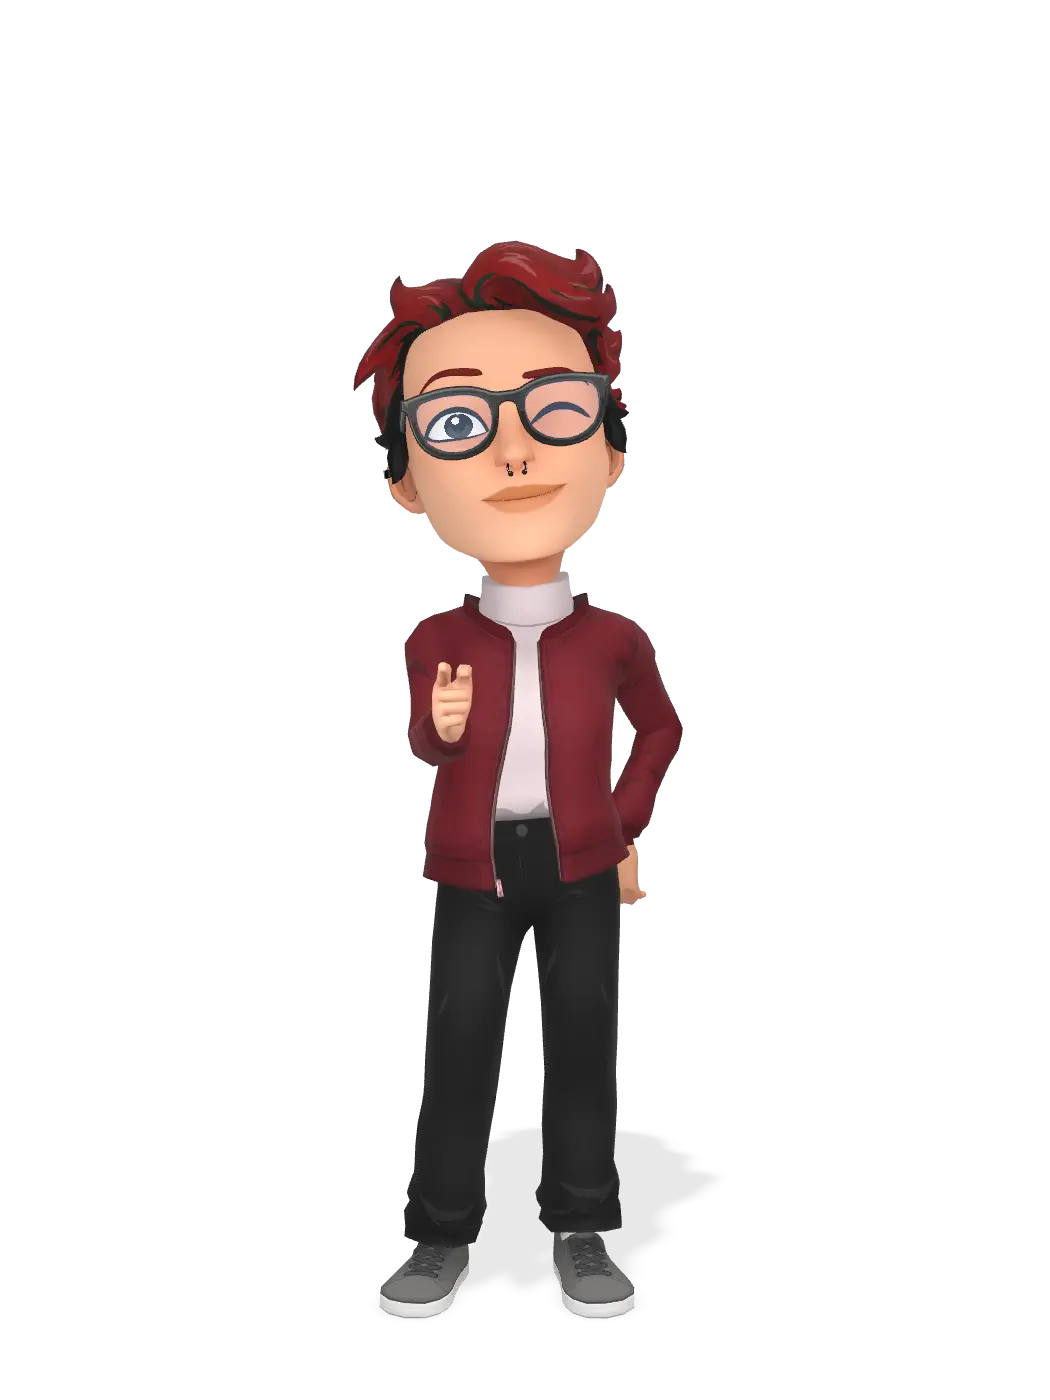 3D Bitmoji for thsthe_chariot